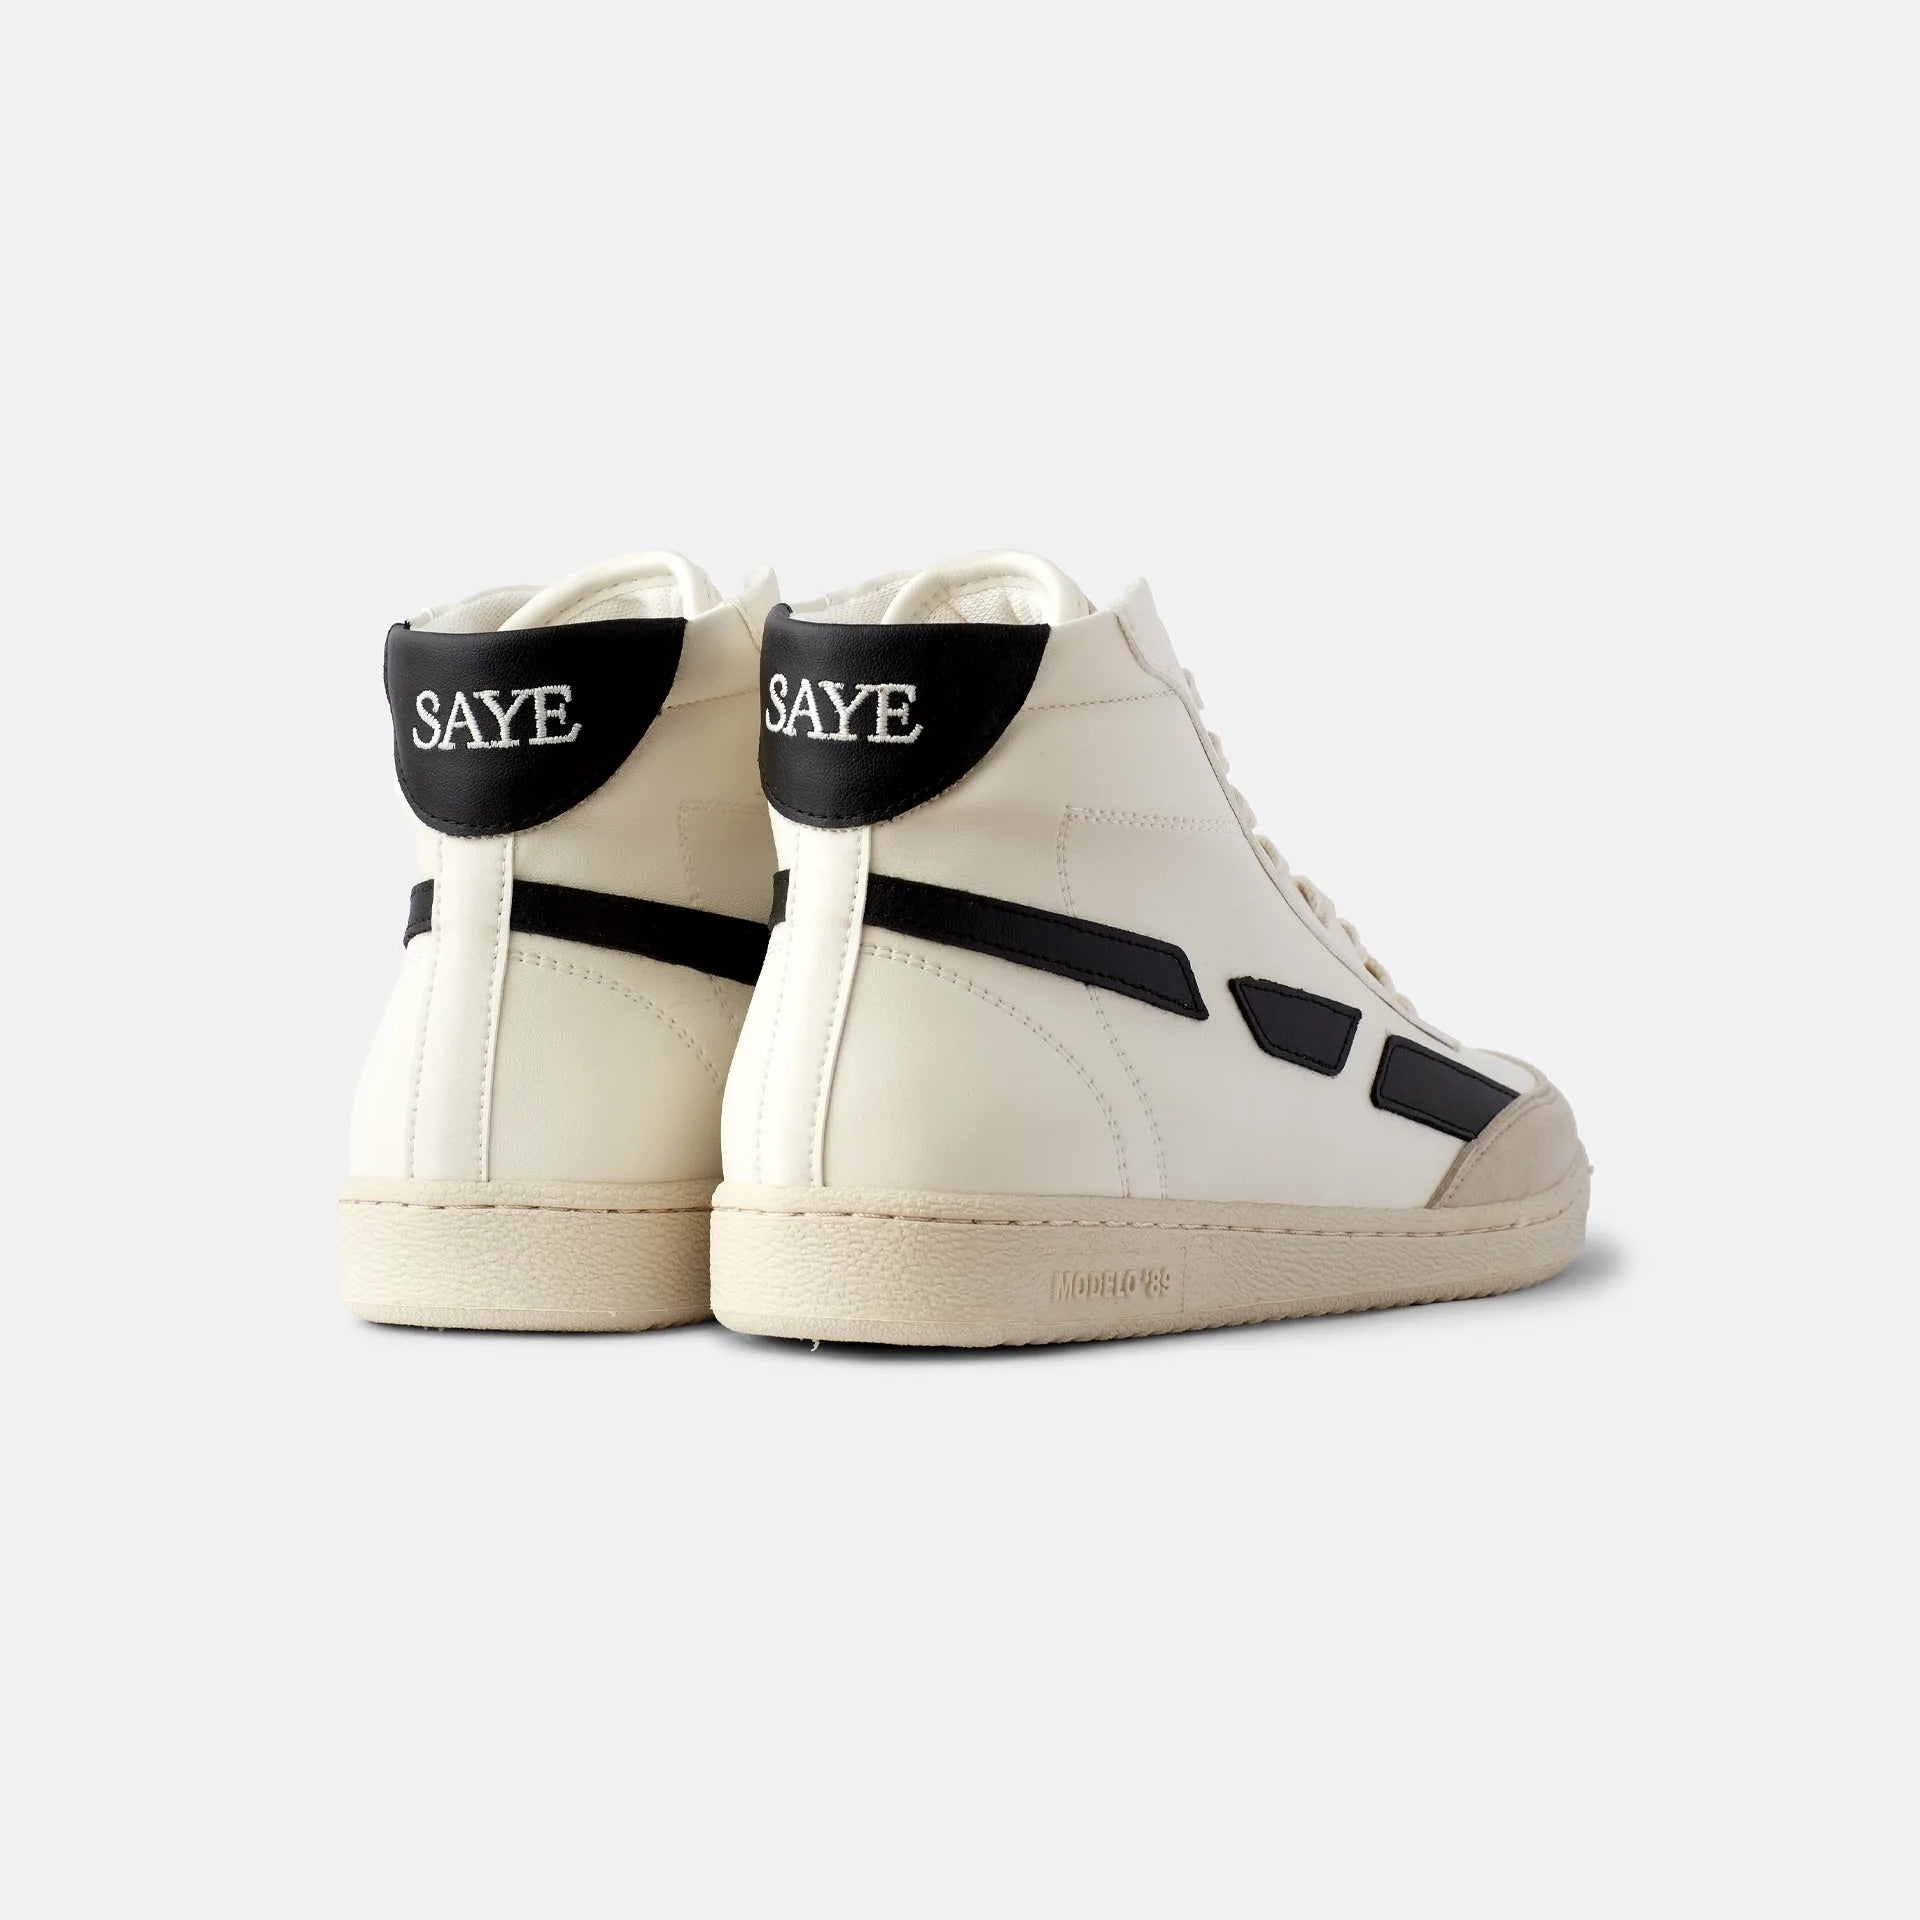 A pair of SAYE Modelo '89 Hi Sneakers - Black with the word 'save' on them, made from corn leather.